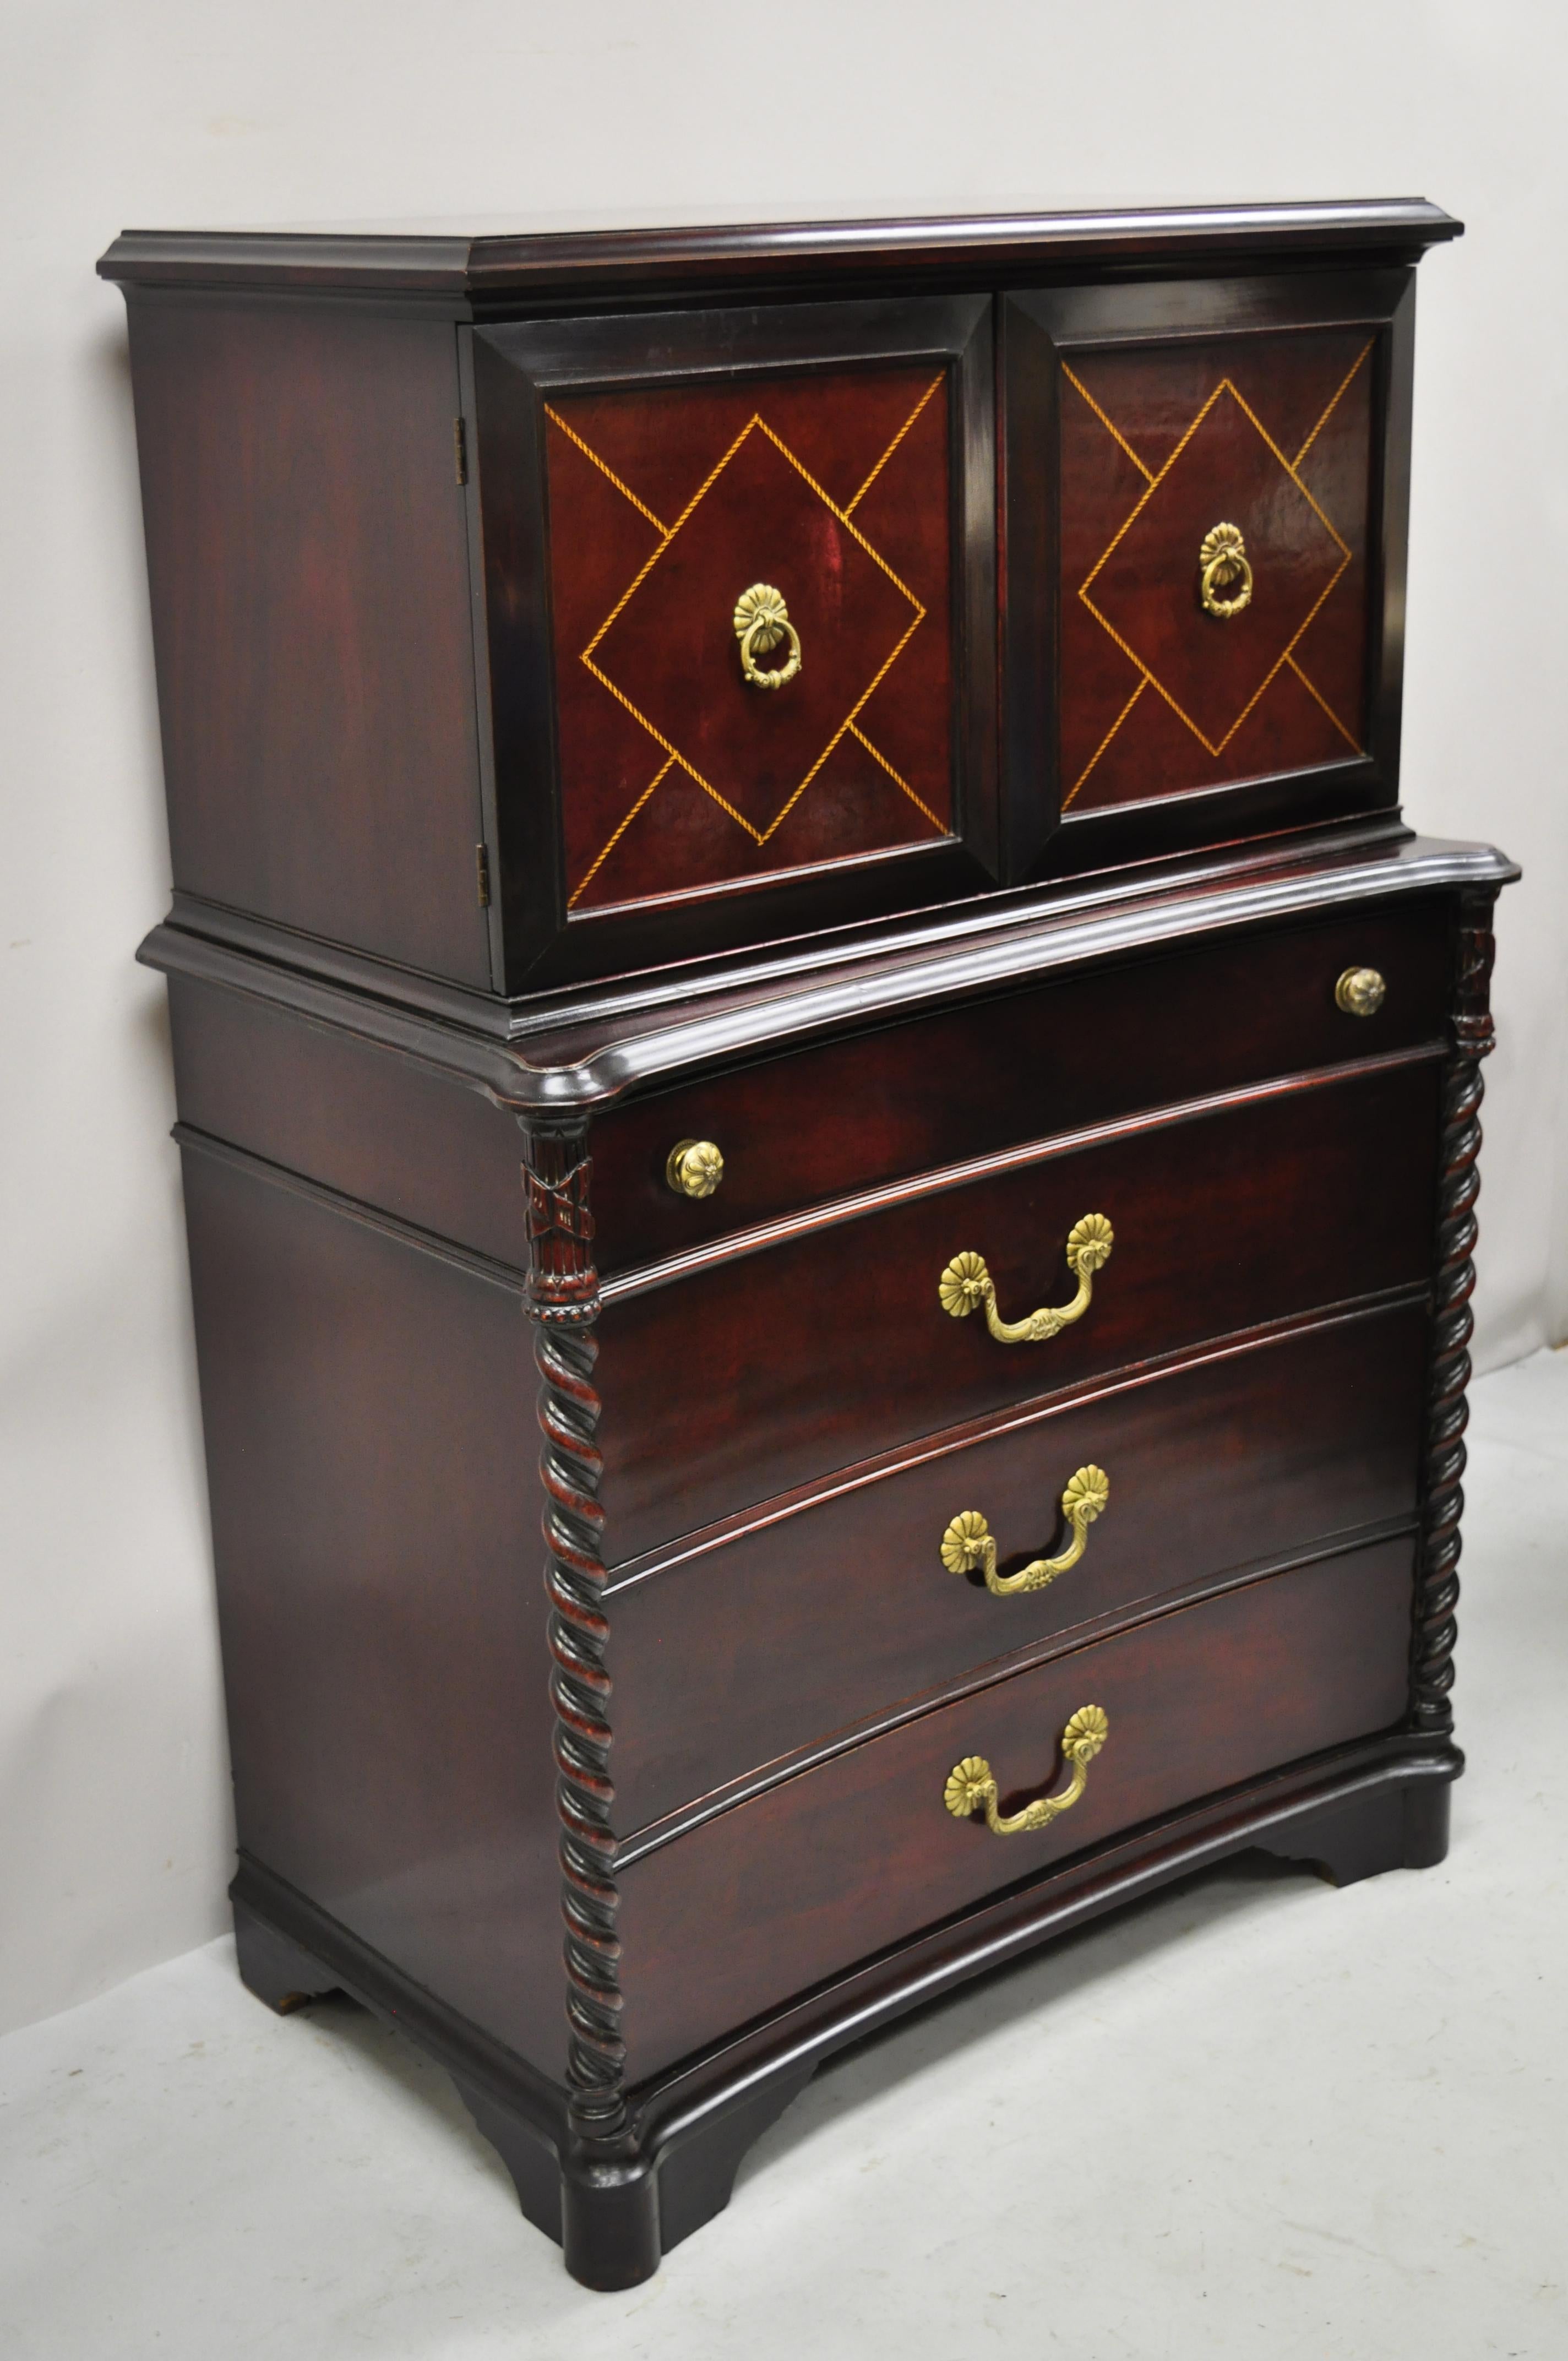 Vintage Hollywood Regency mahogany leather door tall chest on chest dresser cabinet. Item features custom glass top, leather doors, spiral carved twisted columns, 8 dovetailed drawers, solid brass hardware, quality American craftsmanship, great